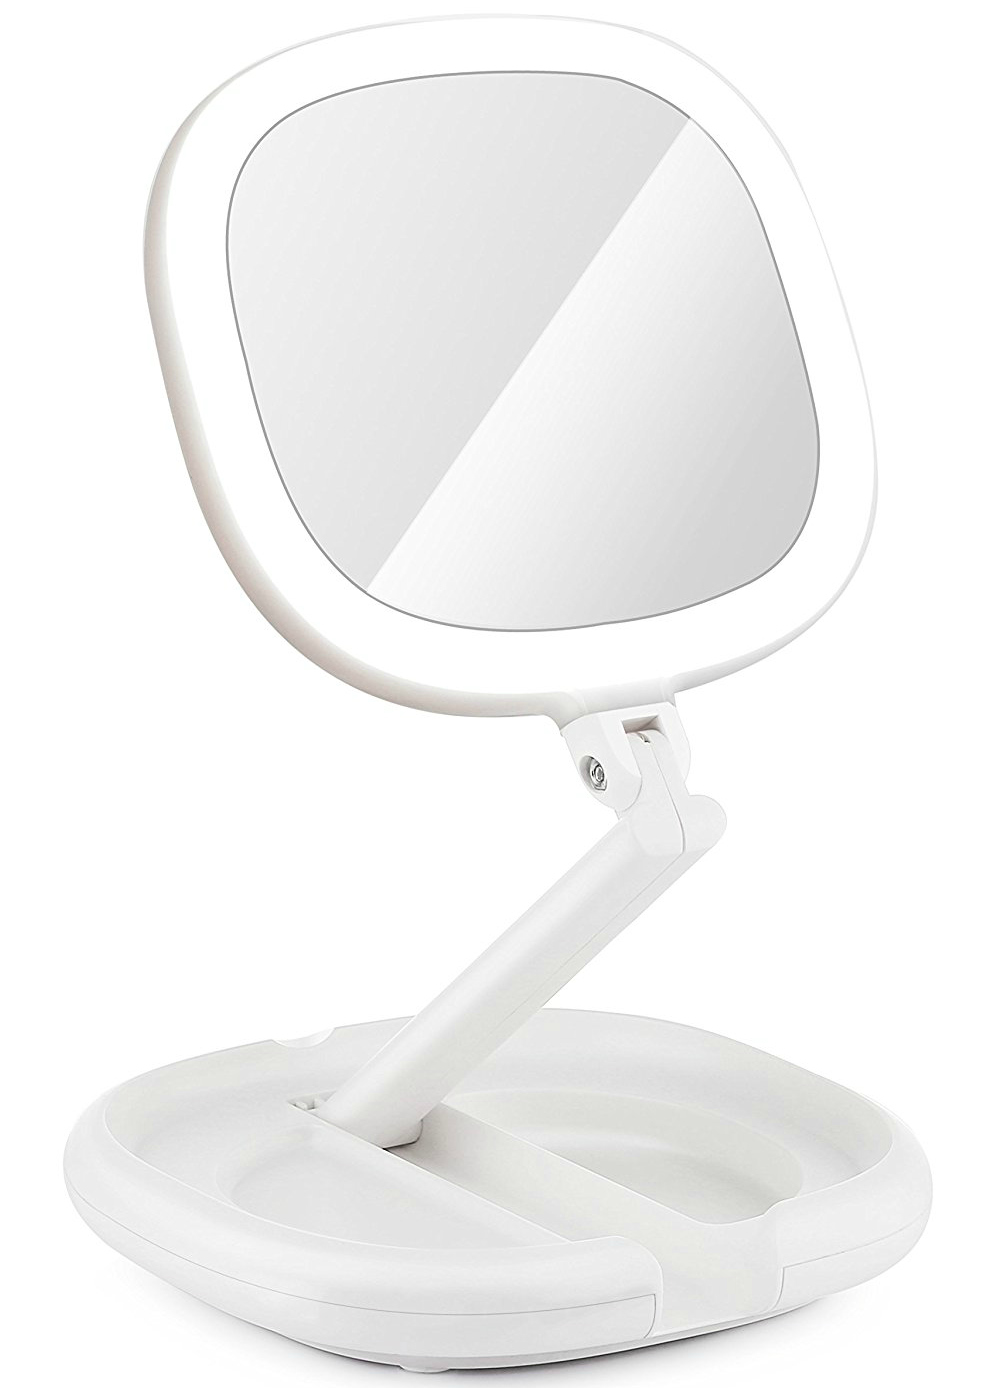 How to Choose the Right Travel Mirror